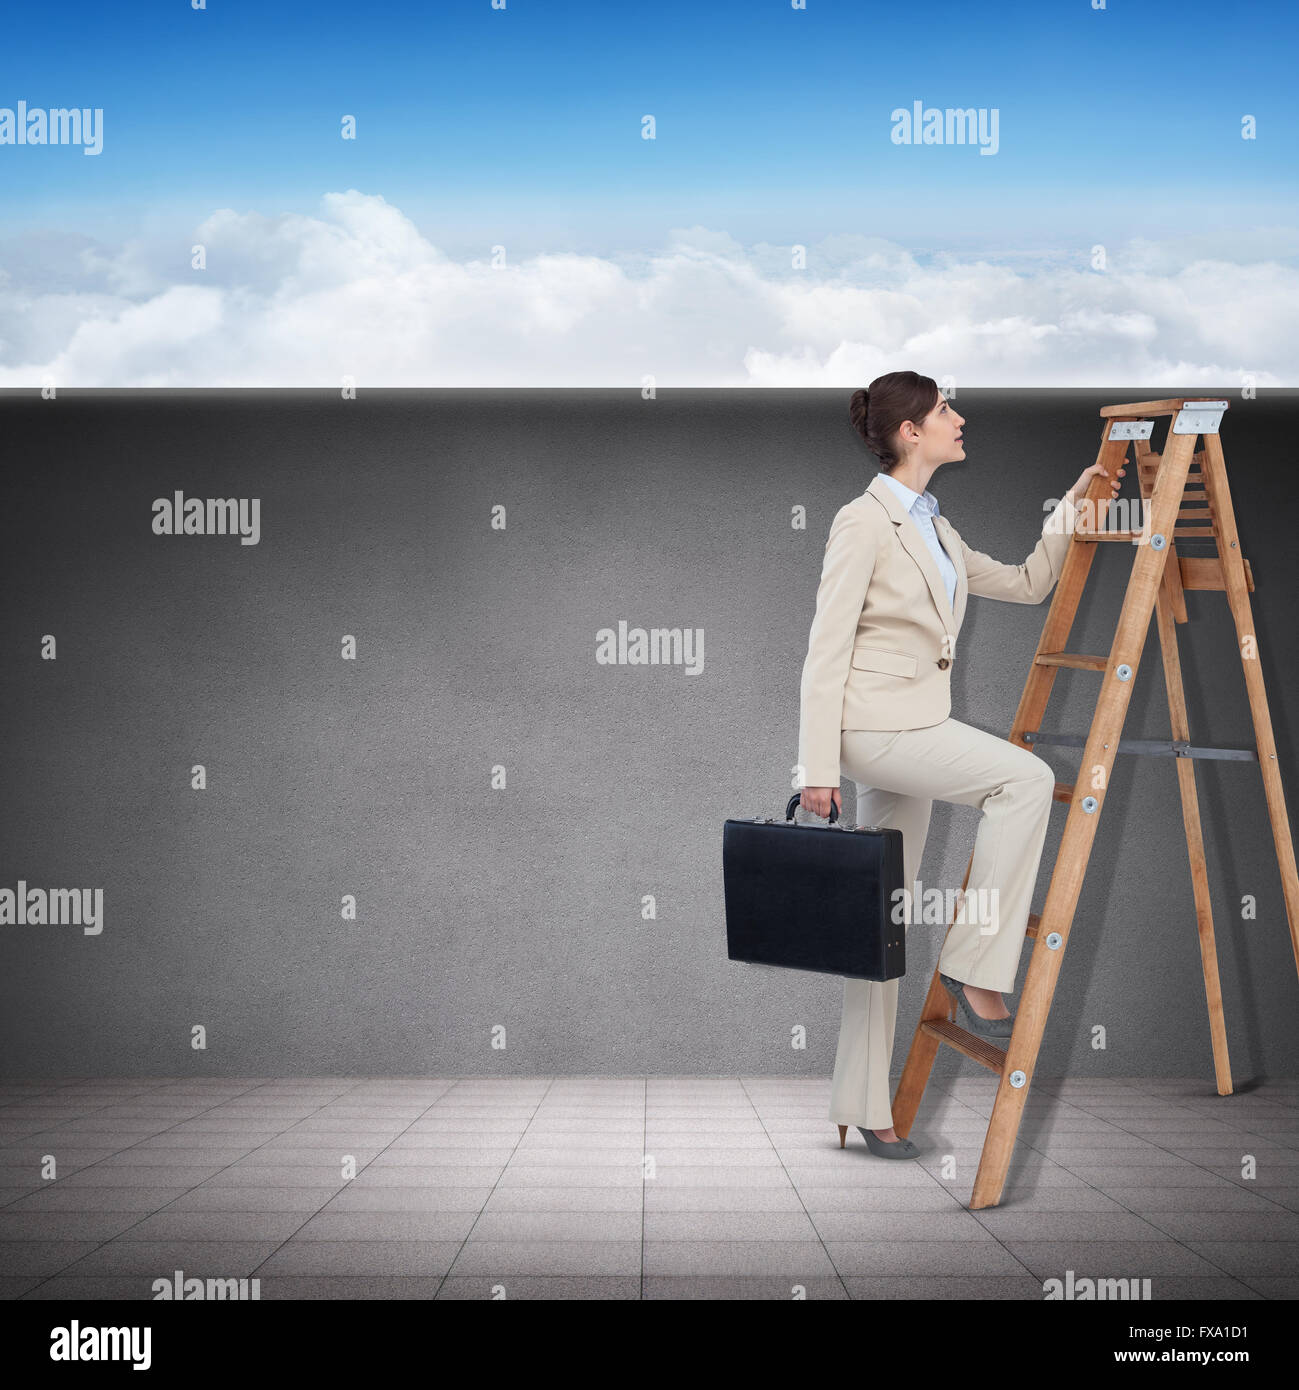 Composite image of businessman looking on a ladder Stock Photo